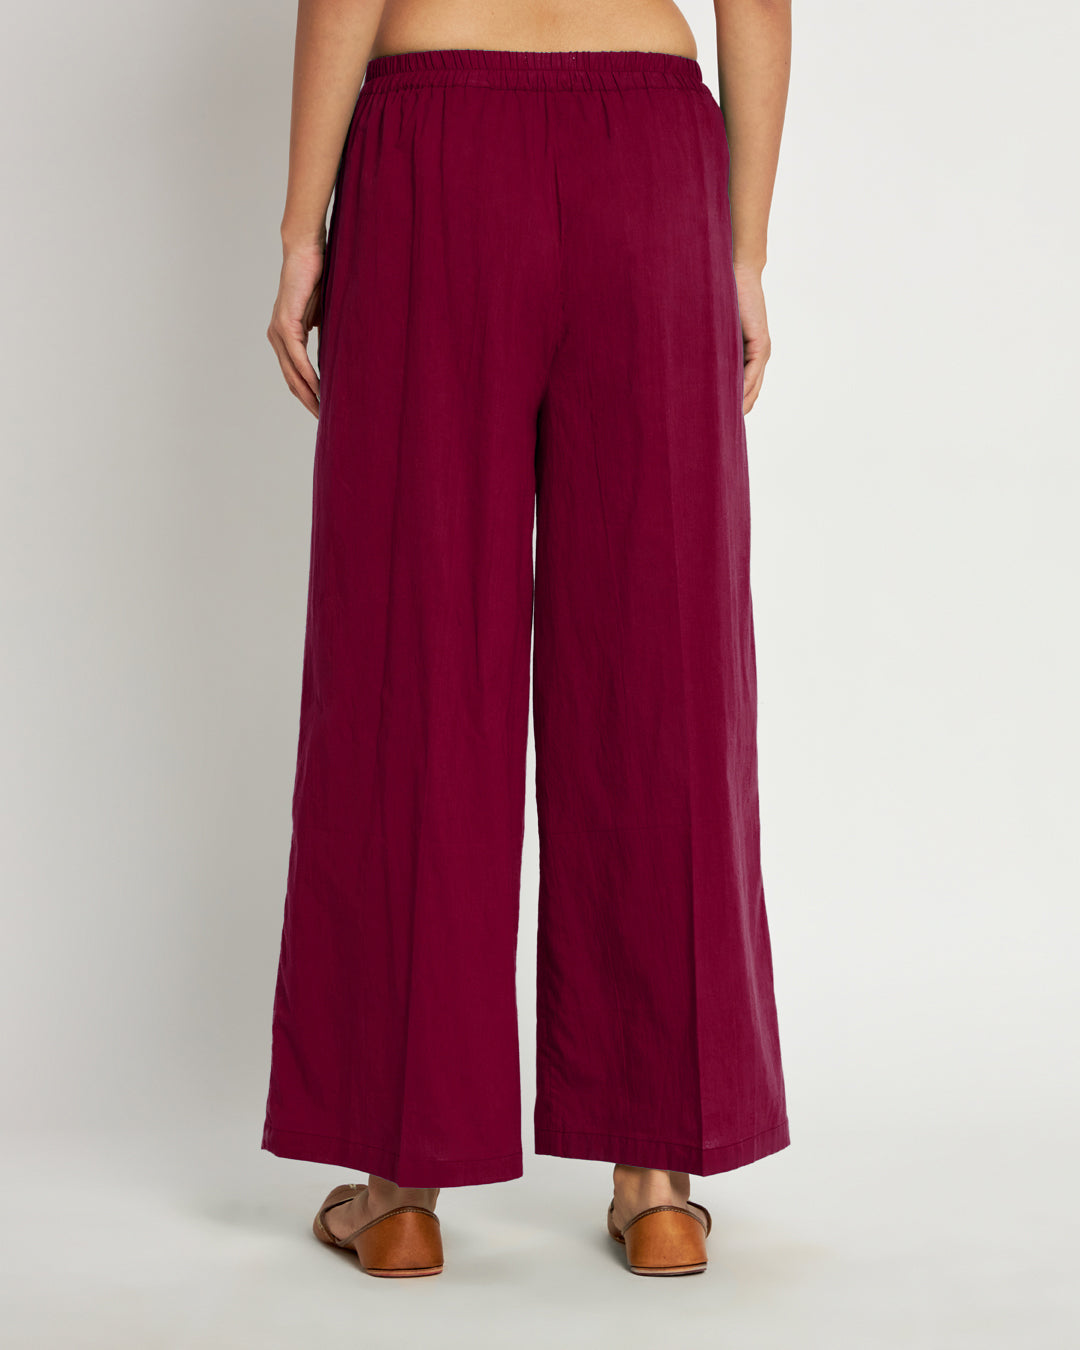 Combo: Black & Russet Red Wide Pants- Set Of 2